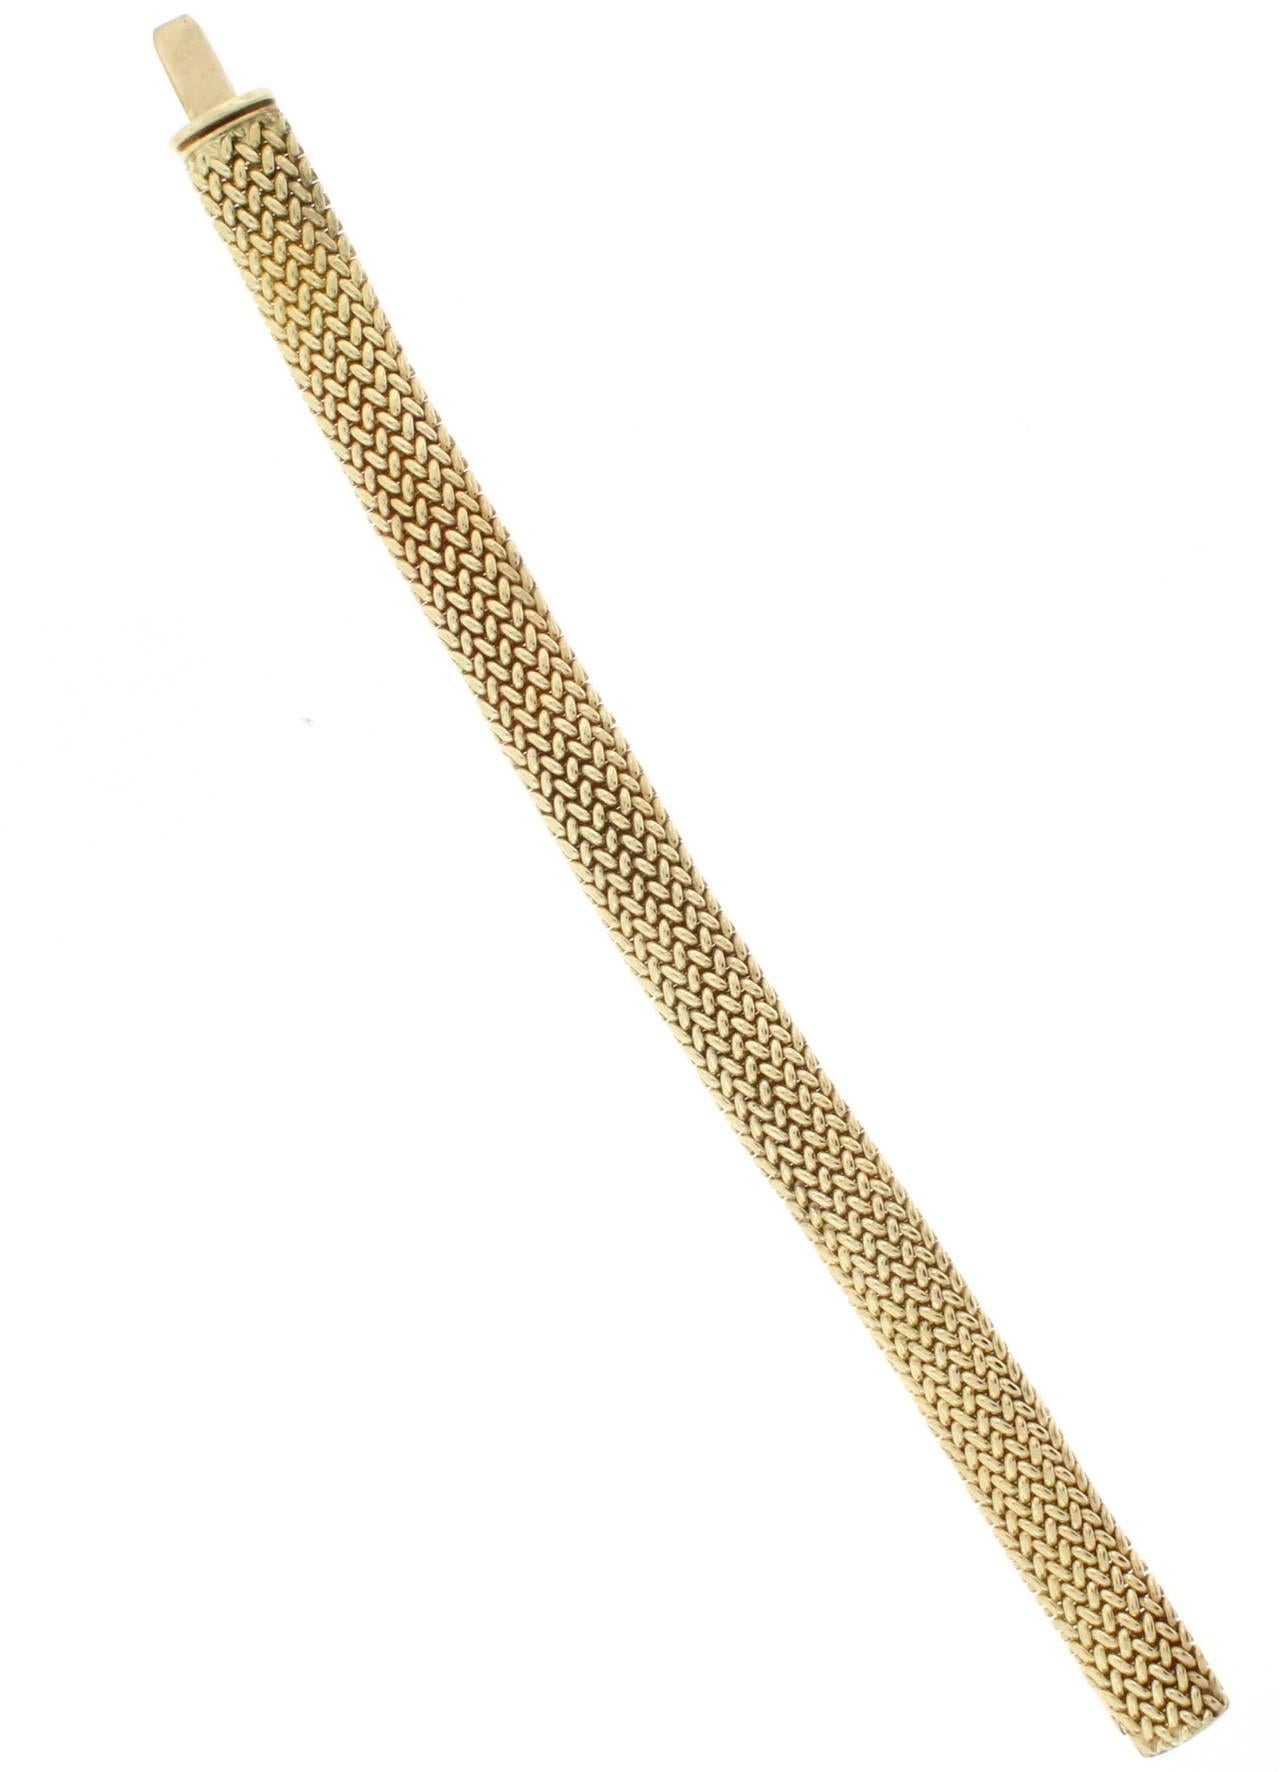 This18 karat yellow gold Tiffany & Co. Somerset Bracelet mesh bracelet is 9.5 millimeters in width.  34 grams. 7.25 inches in length